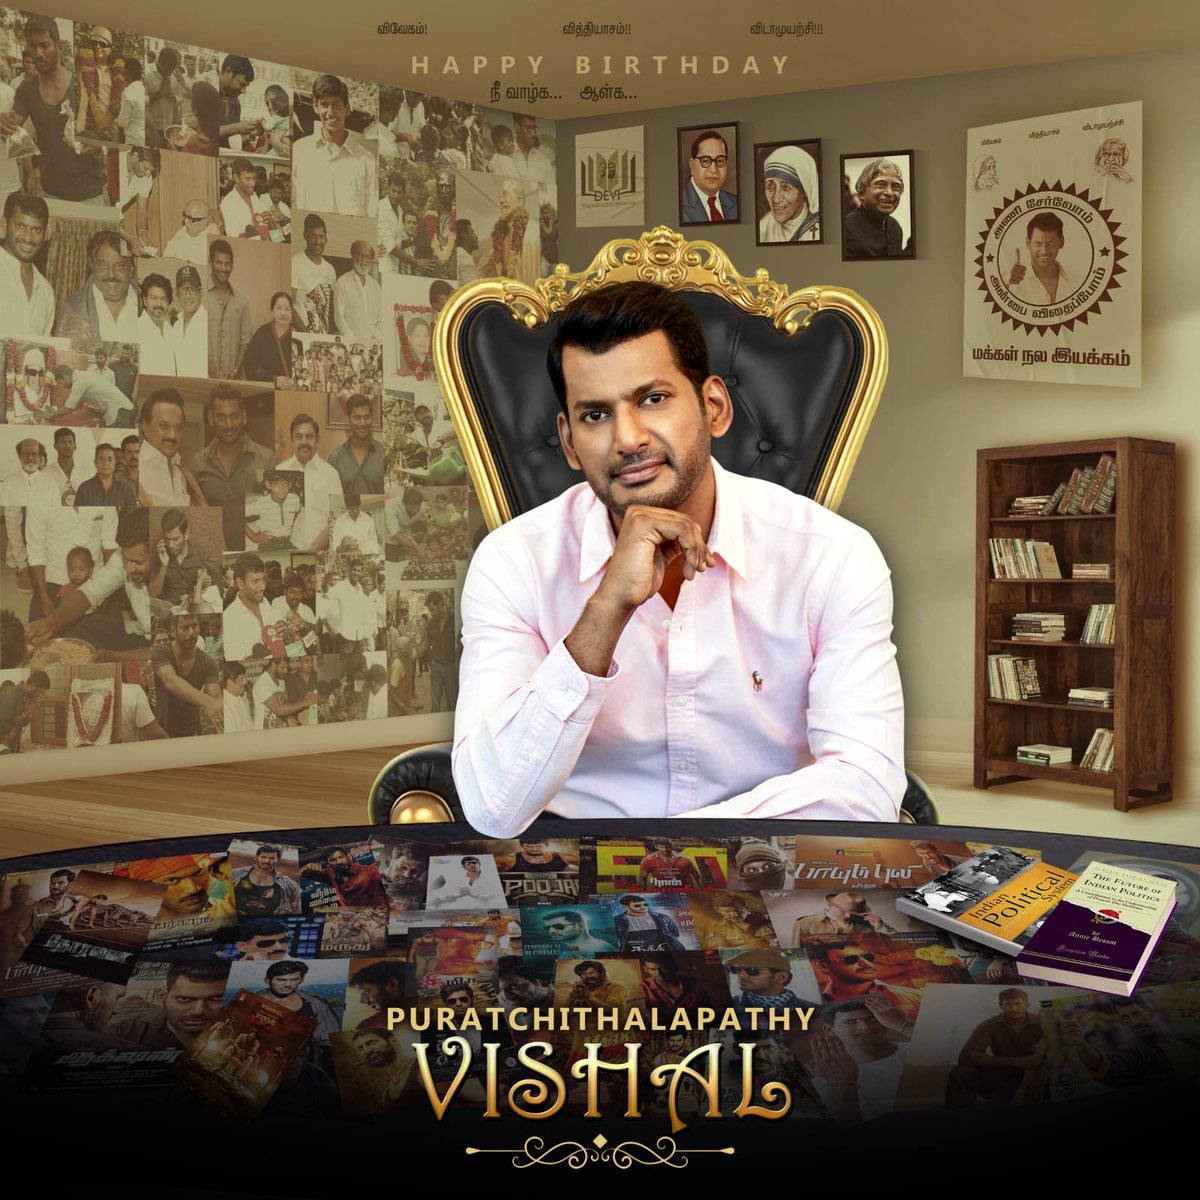 Here’s the much awaited #CommonDP to celebrate our beloved #PuratchiThalapathy @VishalKOfficial ’s birthday on #Aug29 as #WelfareDay #HBDVishal #VishalBirthdayCDP #Vishal @HariKr_official @VffVishal @DEVIFOUNDATIONS @V_MusicOfficial @johnsoncinepro @ajay_64403 @PROSaiSatish